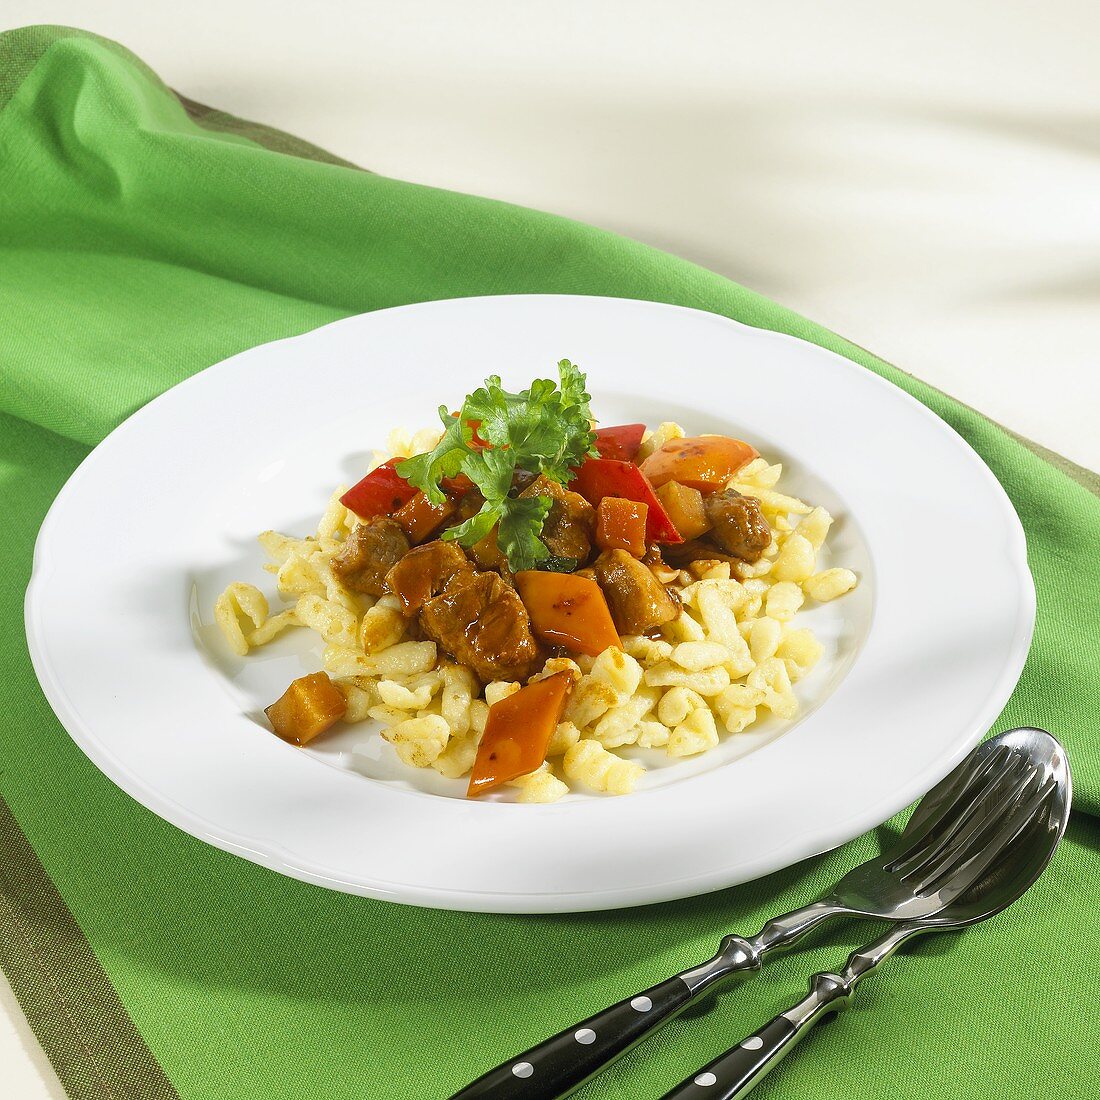 Goulash with peppers and spaetzle noodles